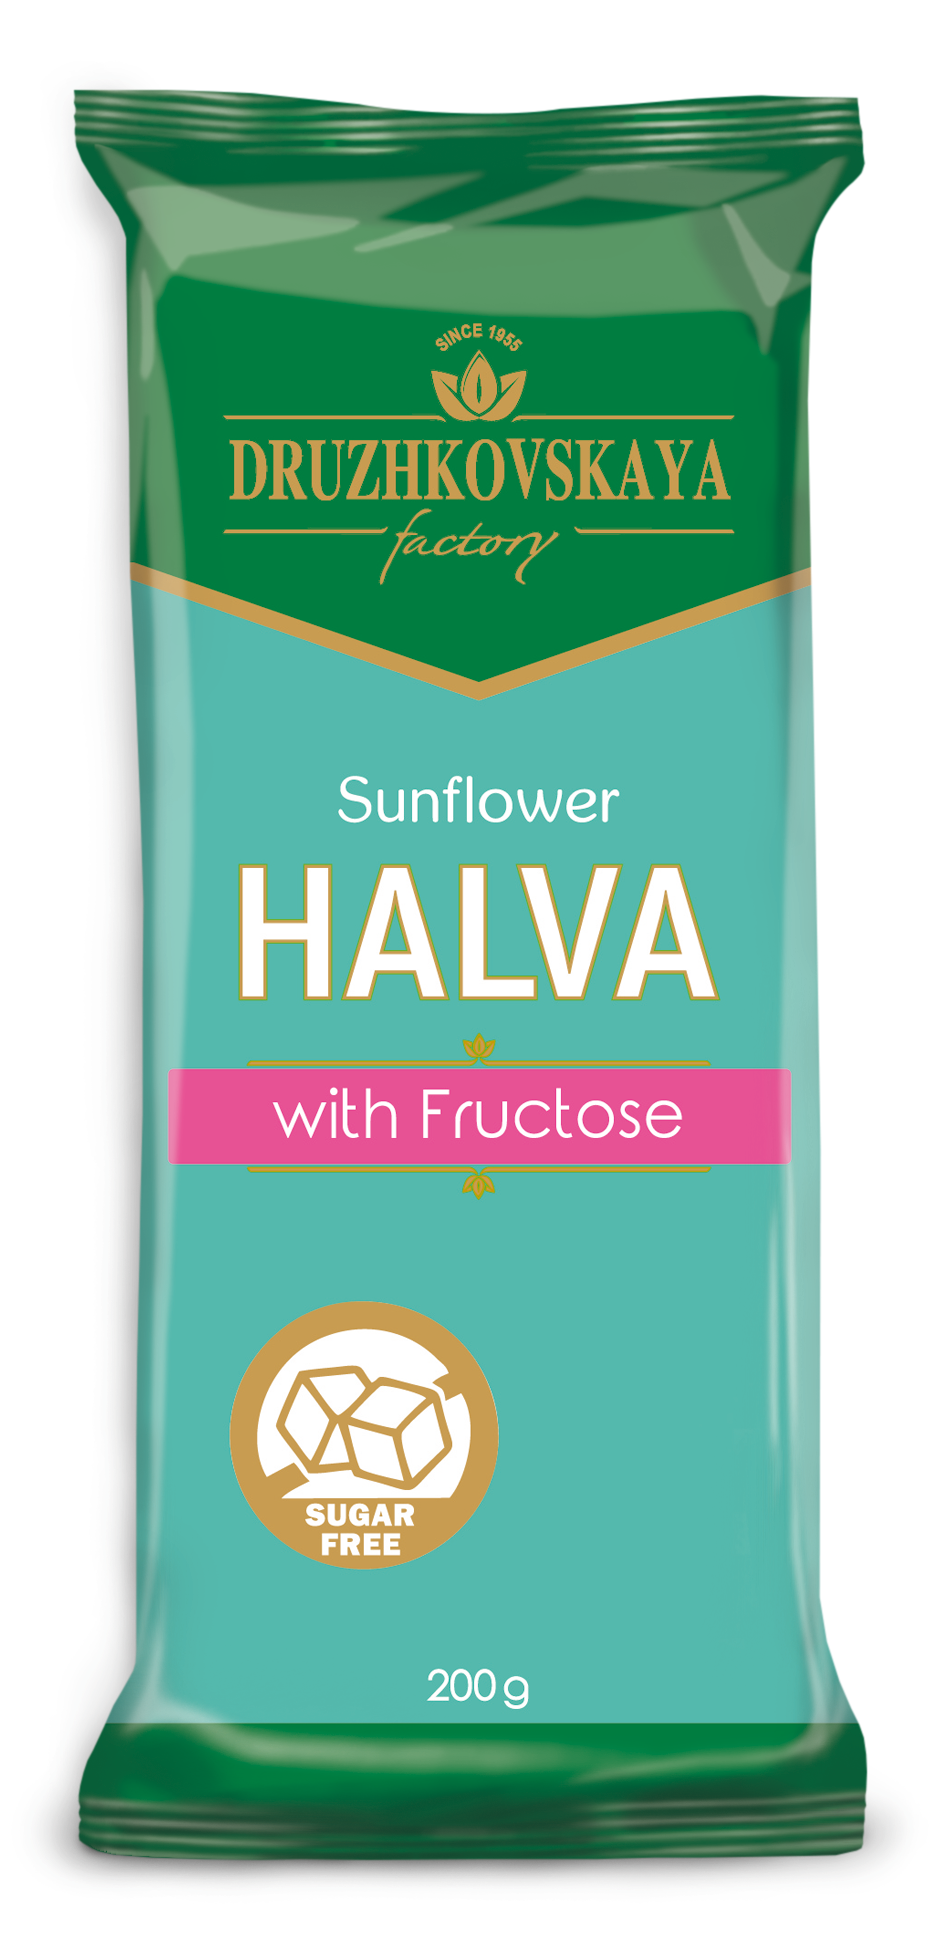 Sunflower Halva on Fructose (sugar free) Packed in Flow-pack, 350 g